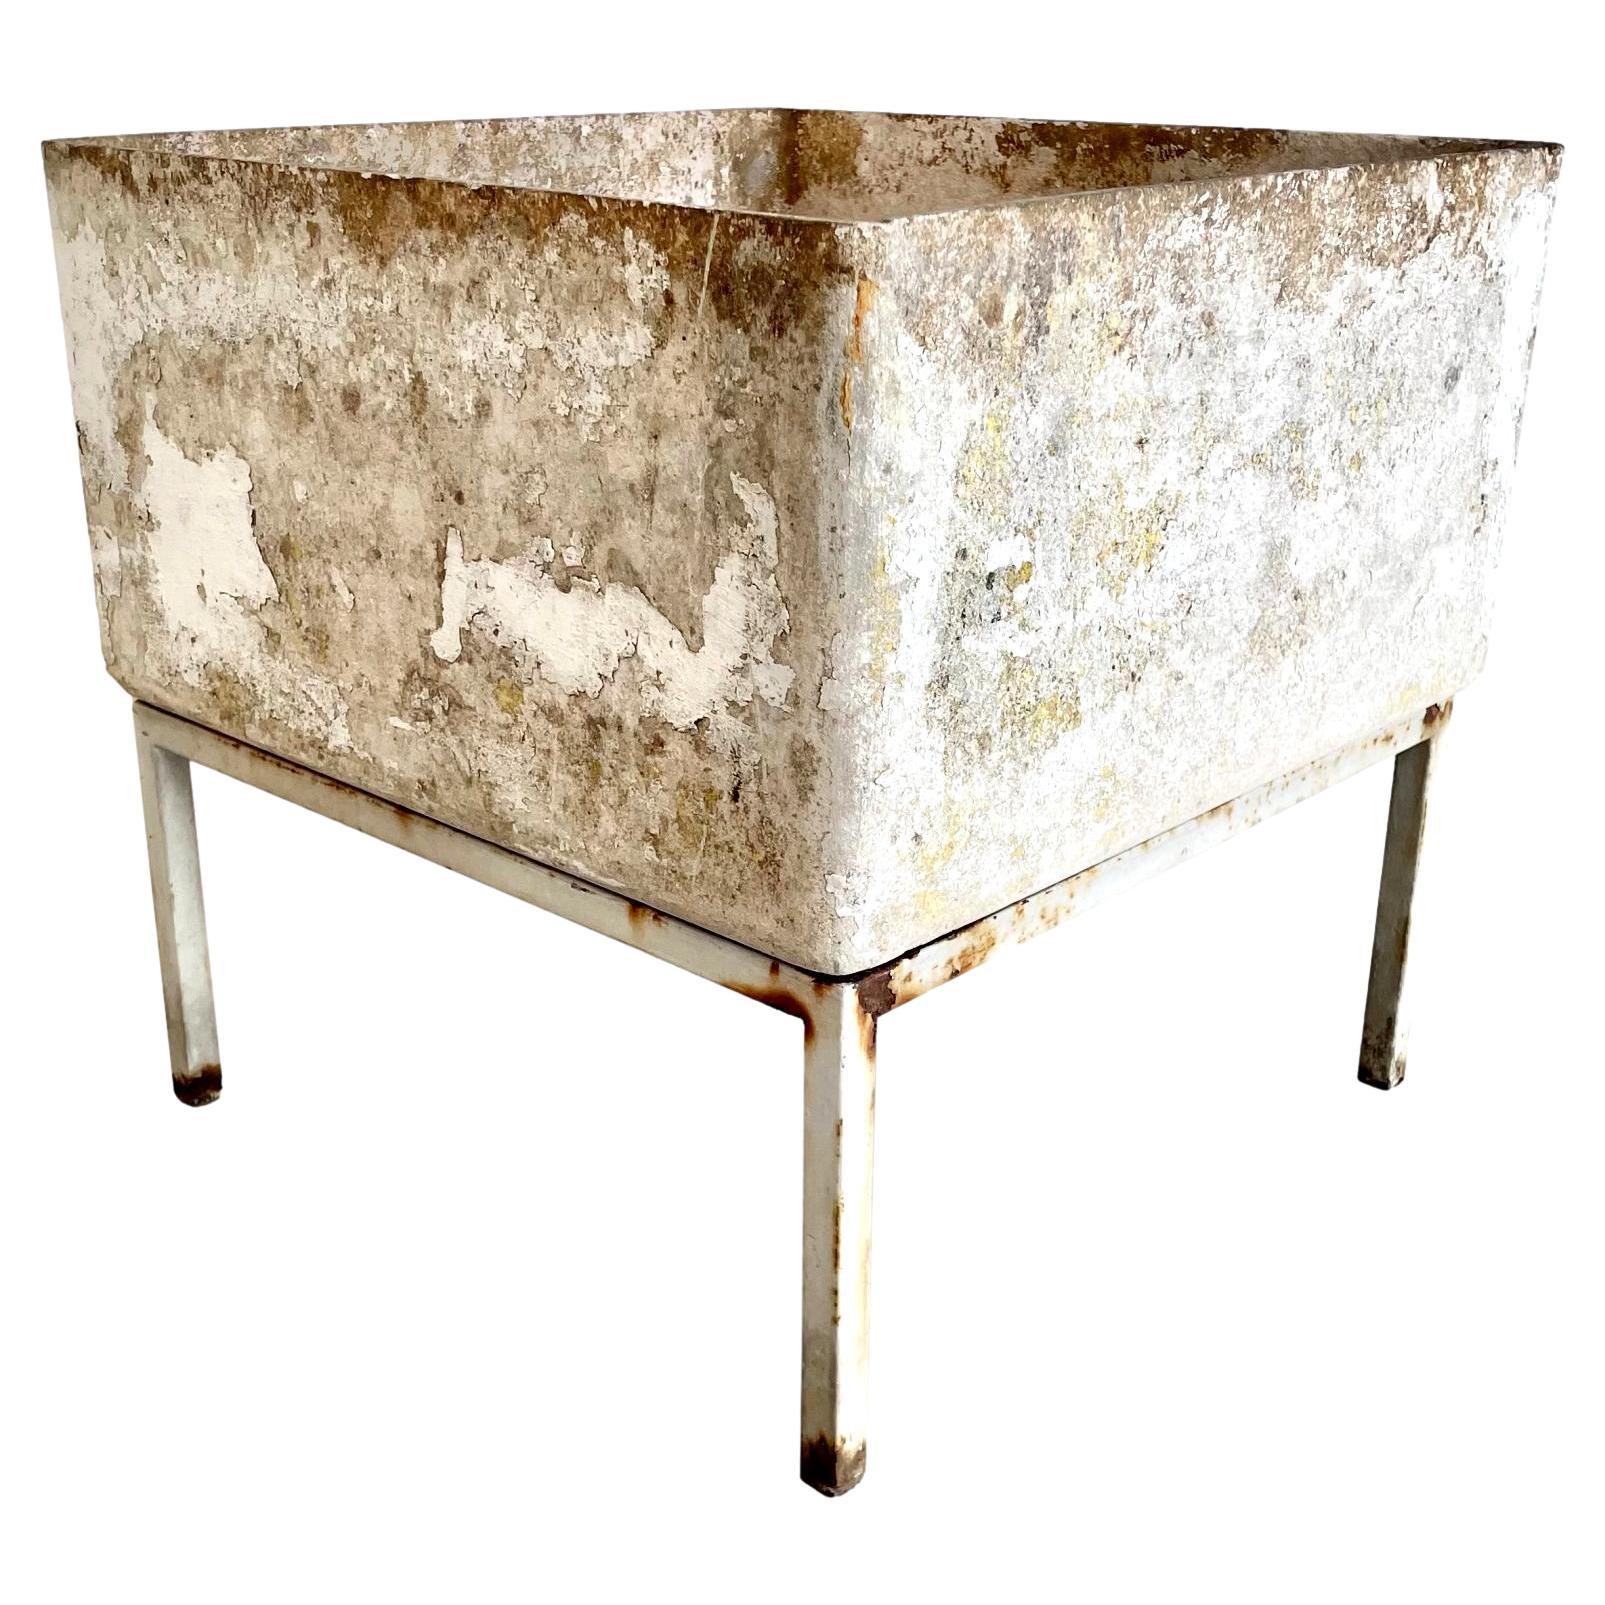 Willy Guhl Concrete Box Planter on Metal Stand, 1970s Switzerland For Sale